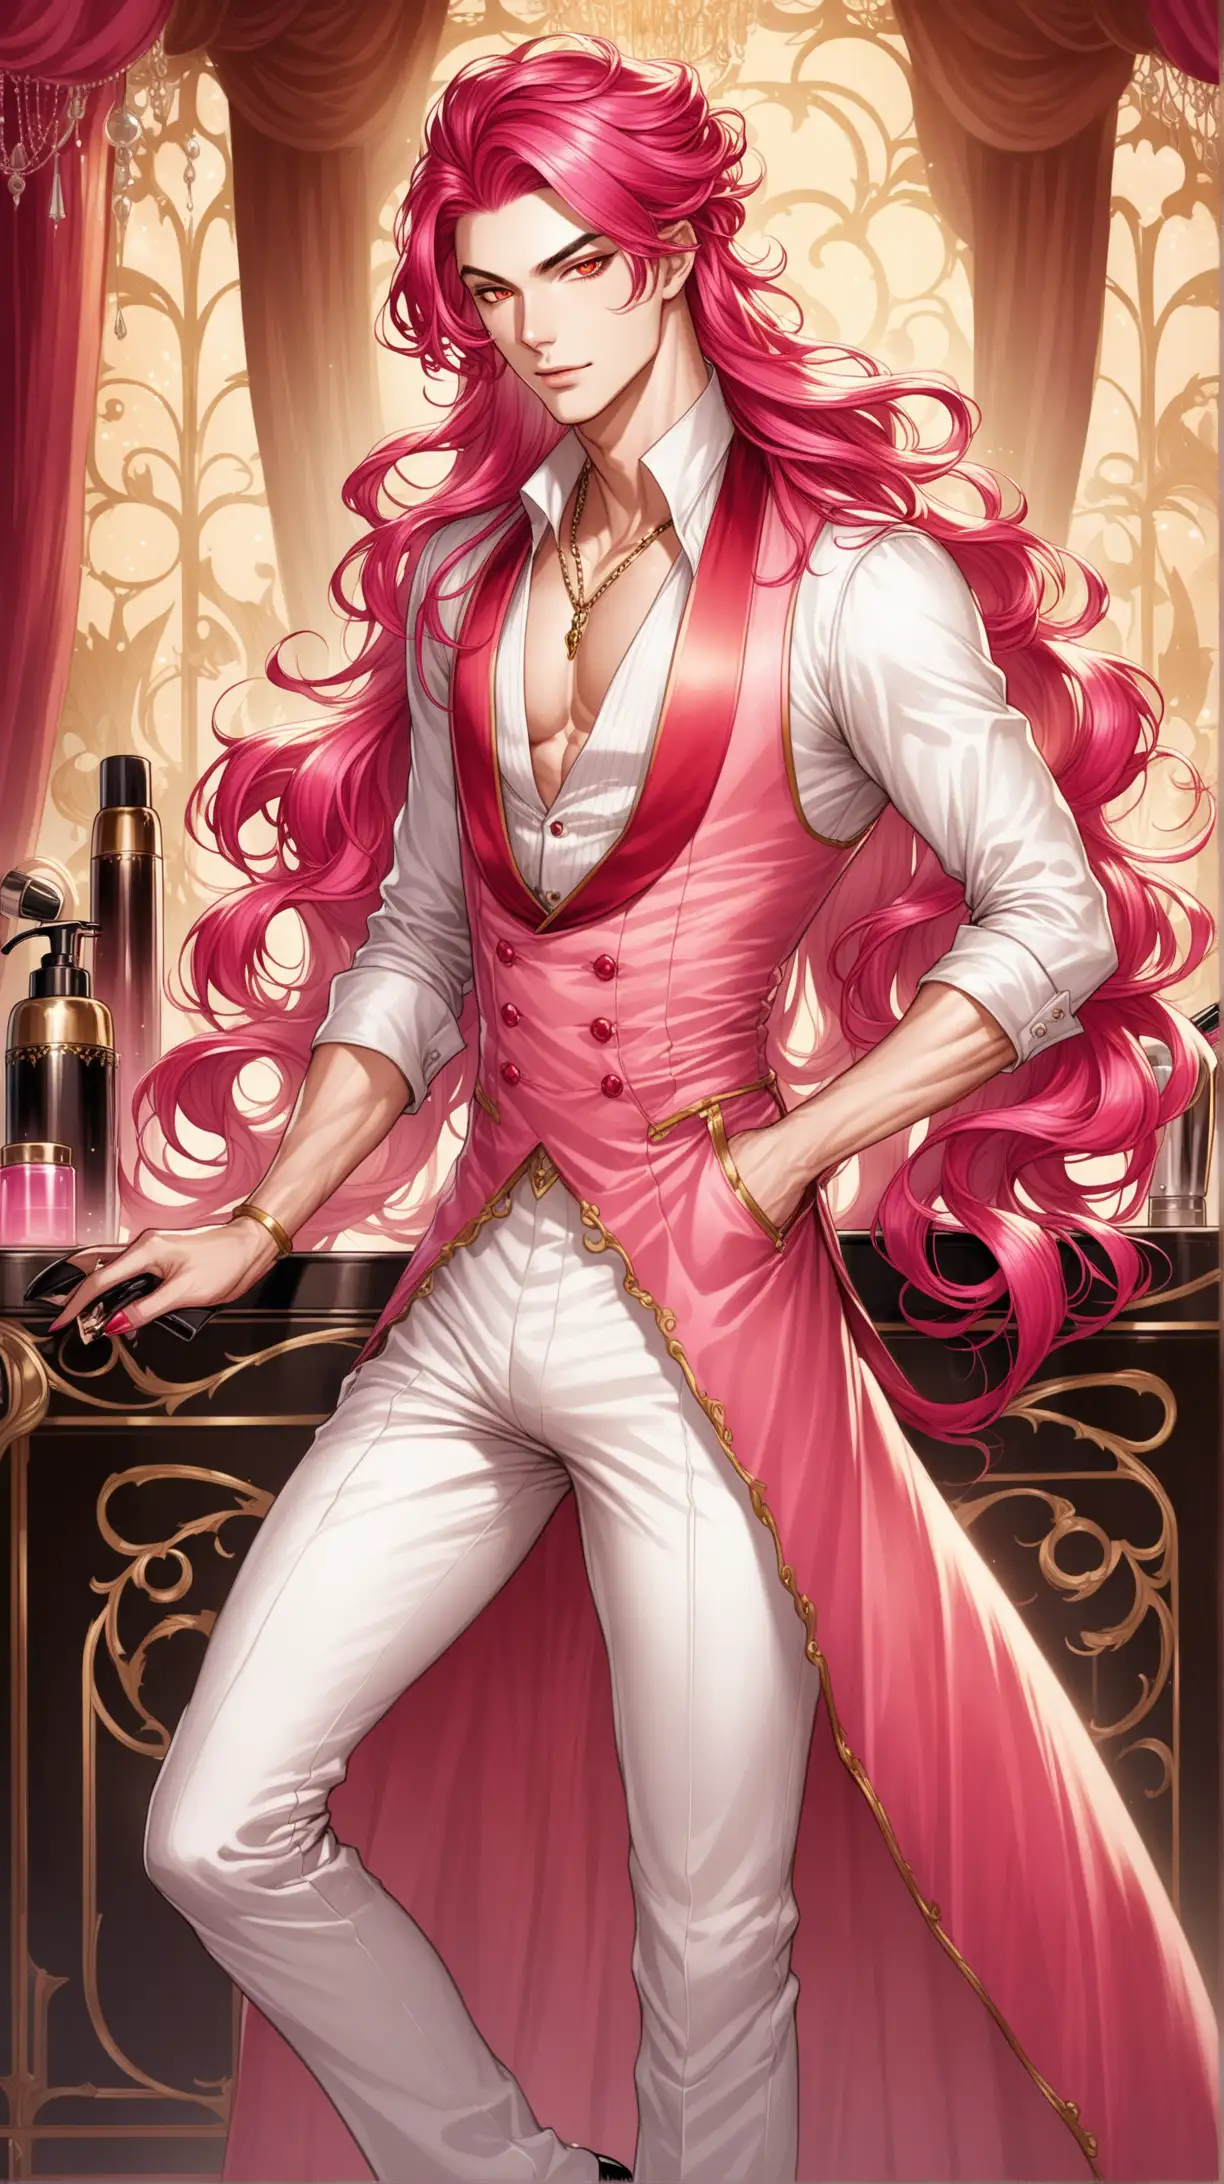 fabulous fantasy male hairdresser with long pink hair, fiery red eyes, plunging V-neck, high heels, belle epoque flourishes